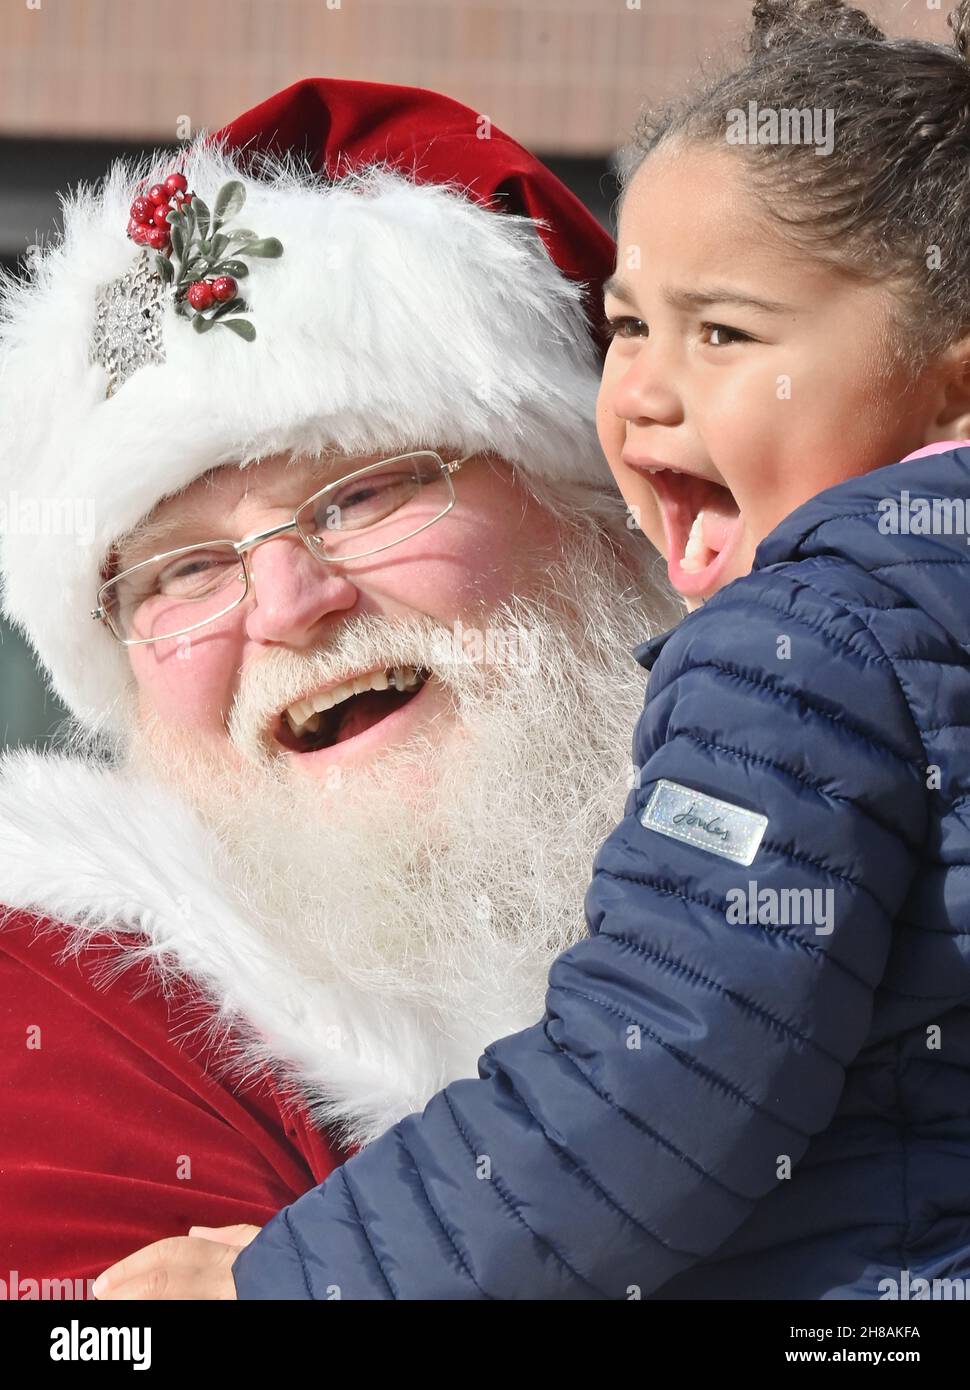 Wilkes Barre, United States. 27th Nov, 2021. A man portraying Santa Claus laughs with a young girl during a holiday market.A man portrays Santa Claus at a holiday marketplace and interacts with children as the kick off of the Christmas season on Small Business Saturday. (Photo by Aimee Dilger/SOPA Images/Sipa USA) Credit: Sipa USA/Alamy Live News Stock Photo